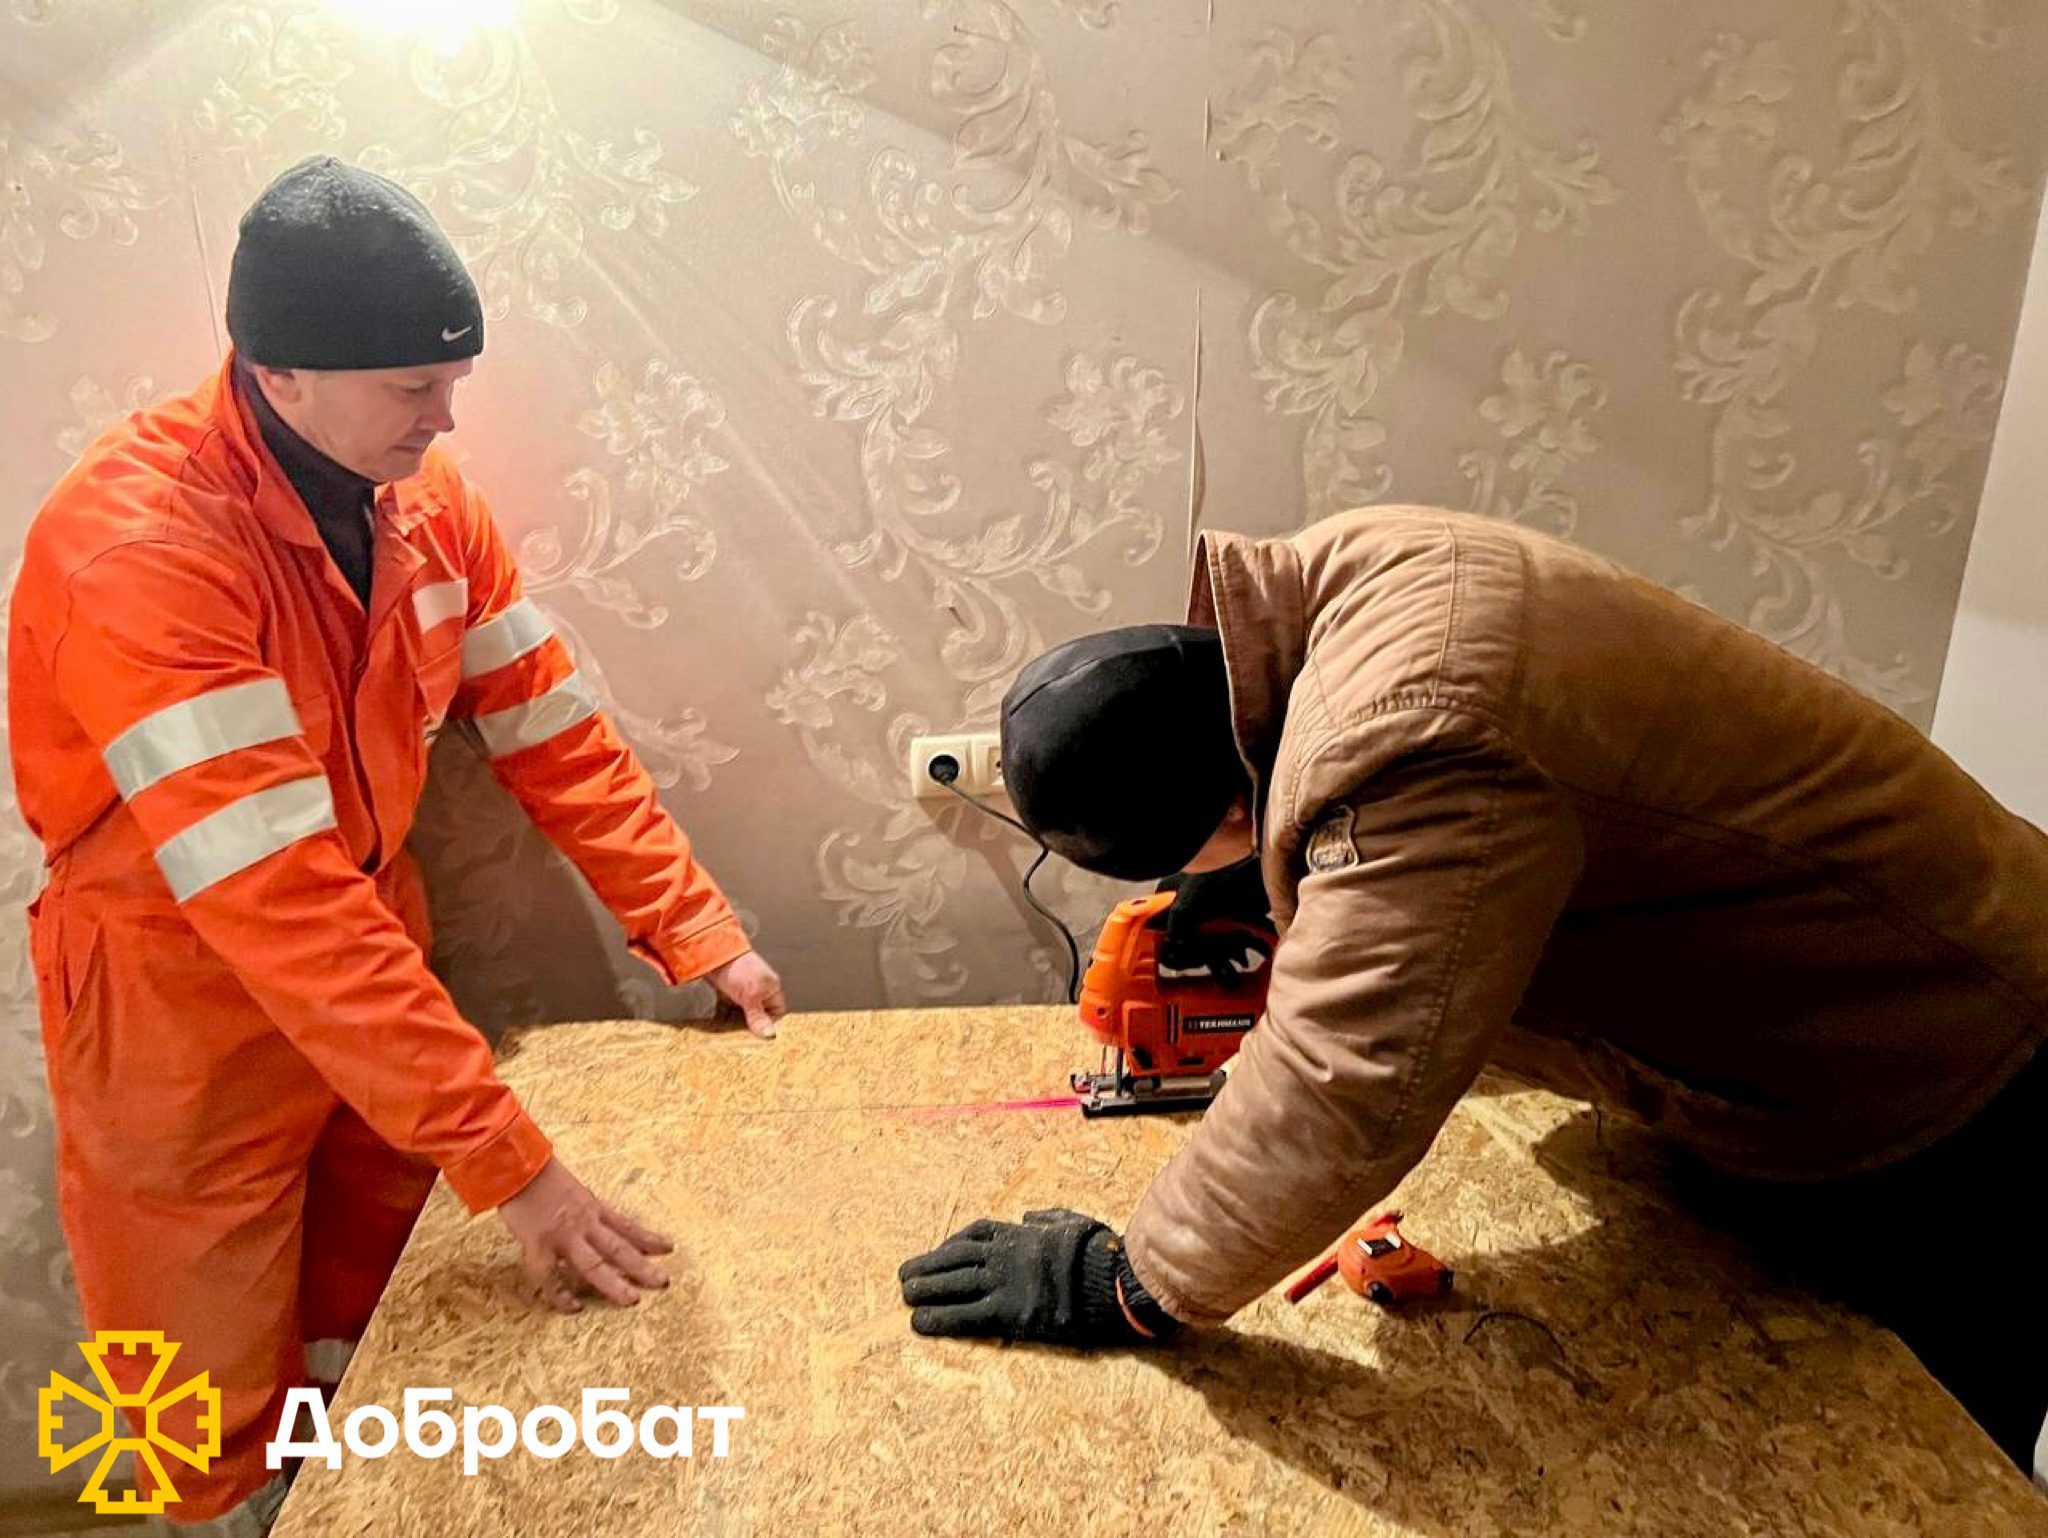 Over 260 volunteers carried out urgent repairs in five regions: about the week of Dobrobat